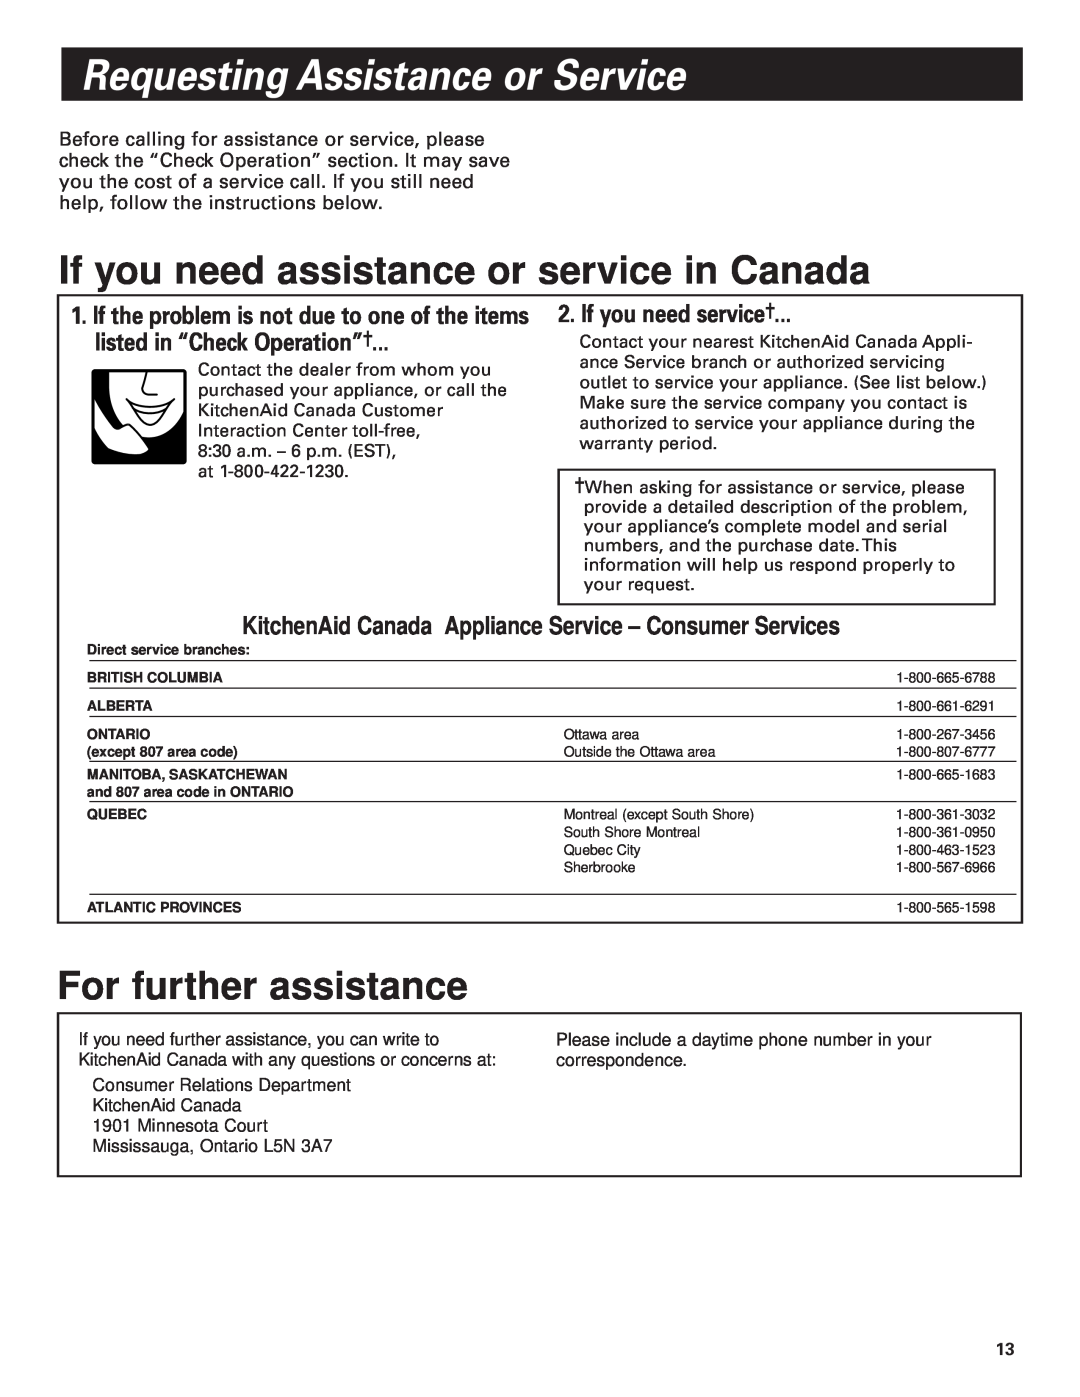 KitchenAid Pro Line Series If you need assistance or service in Canada, listed in “Check Operation”, If you need service 